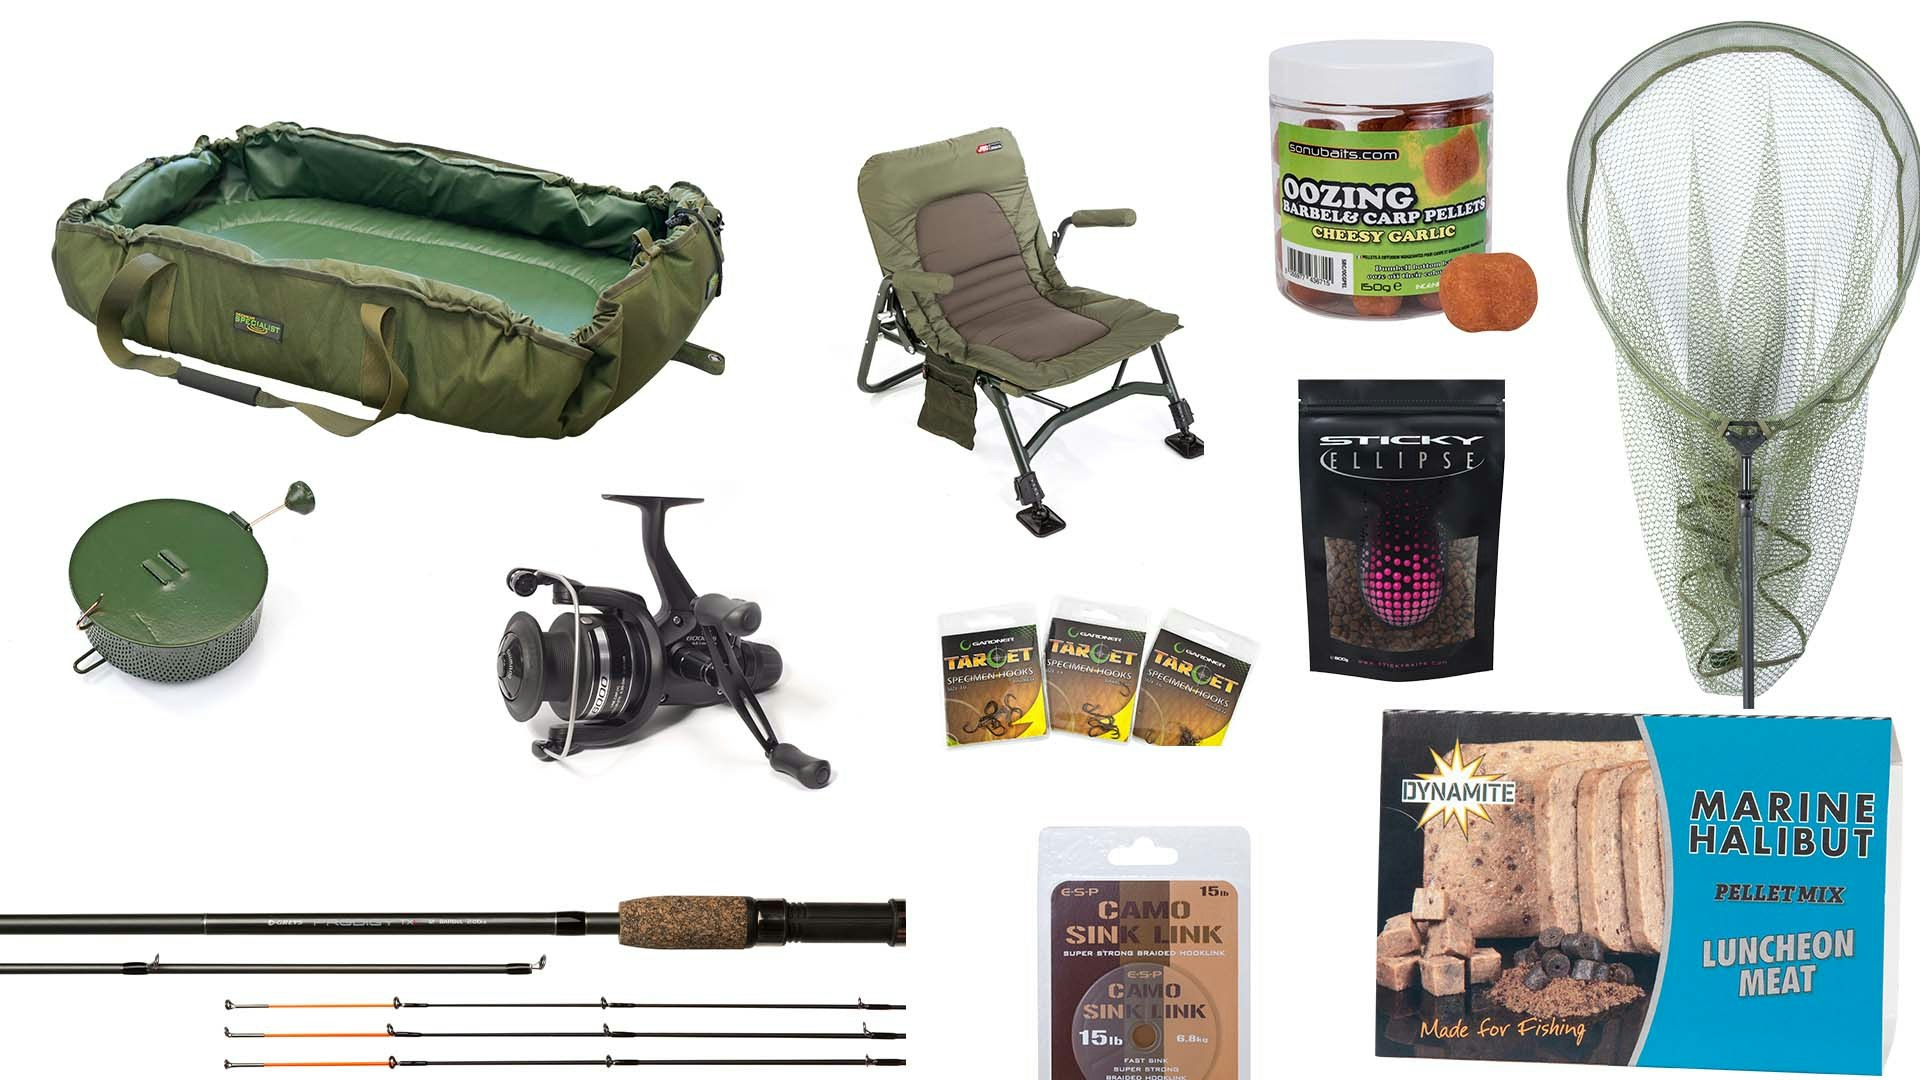 The tackle and baits you need to go barbel fishing